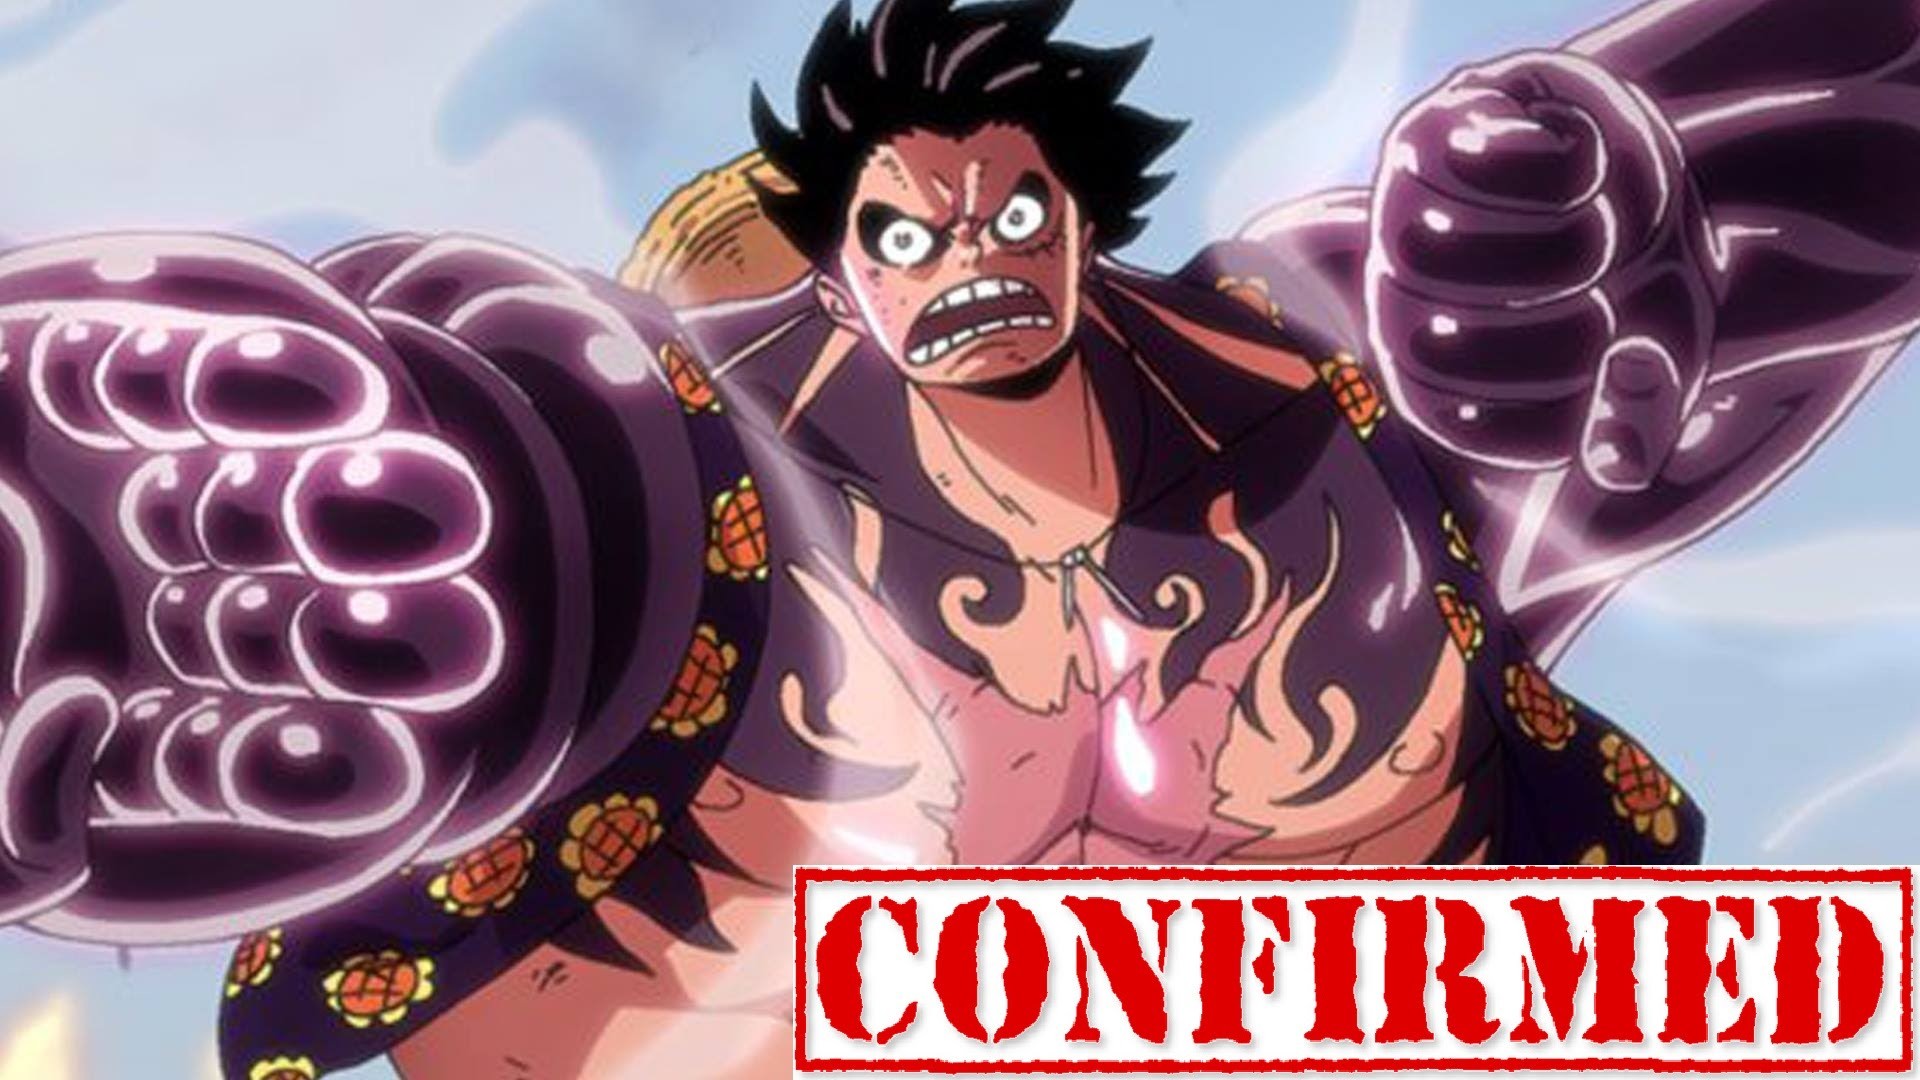 1920x1080 Top 5 One Piece Burning Blood Reasons to own! - Gear Fourth Luffy vs  Doflamingo CONFIRMED! Anime - YouTube